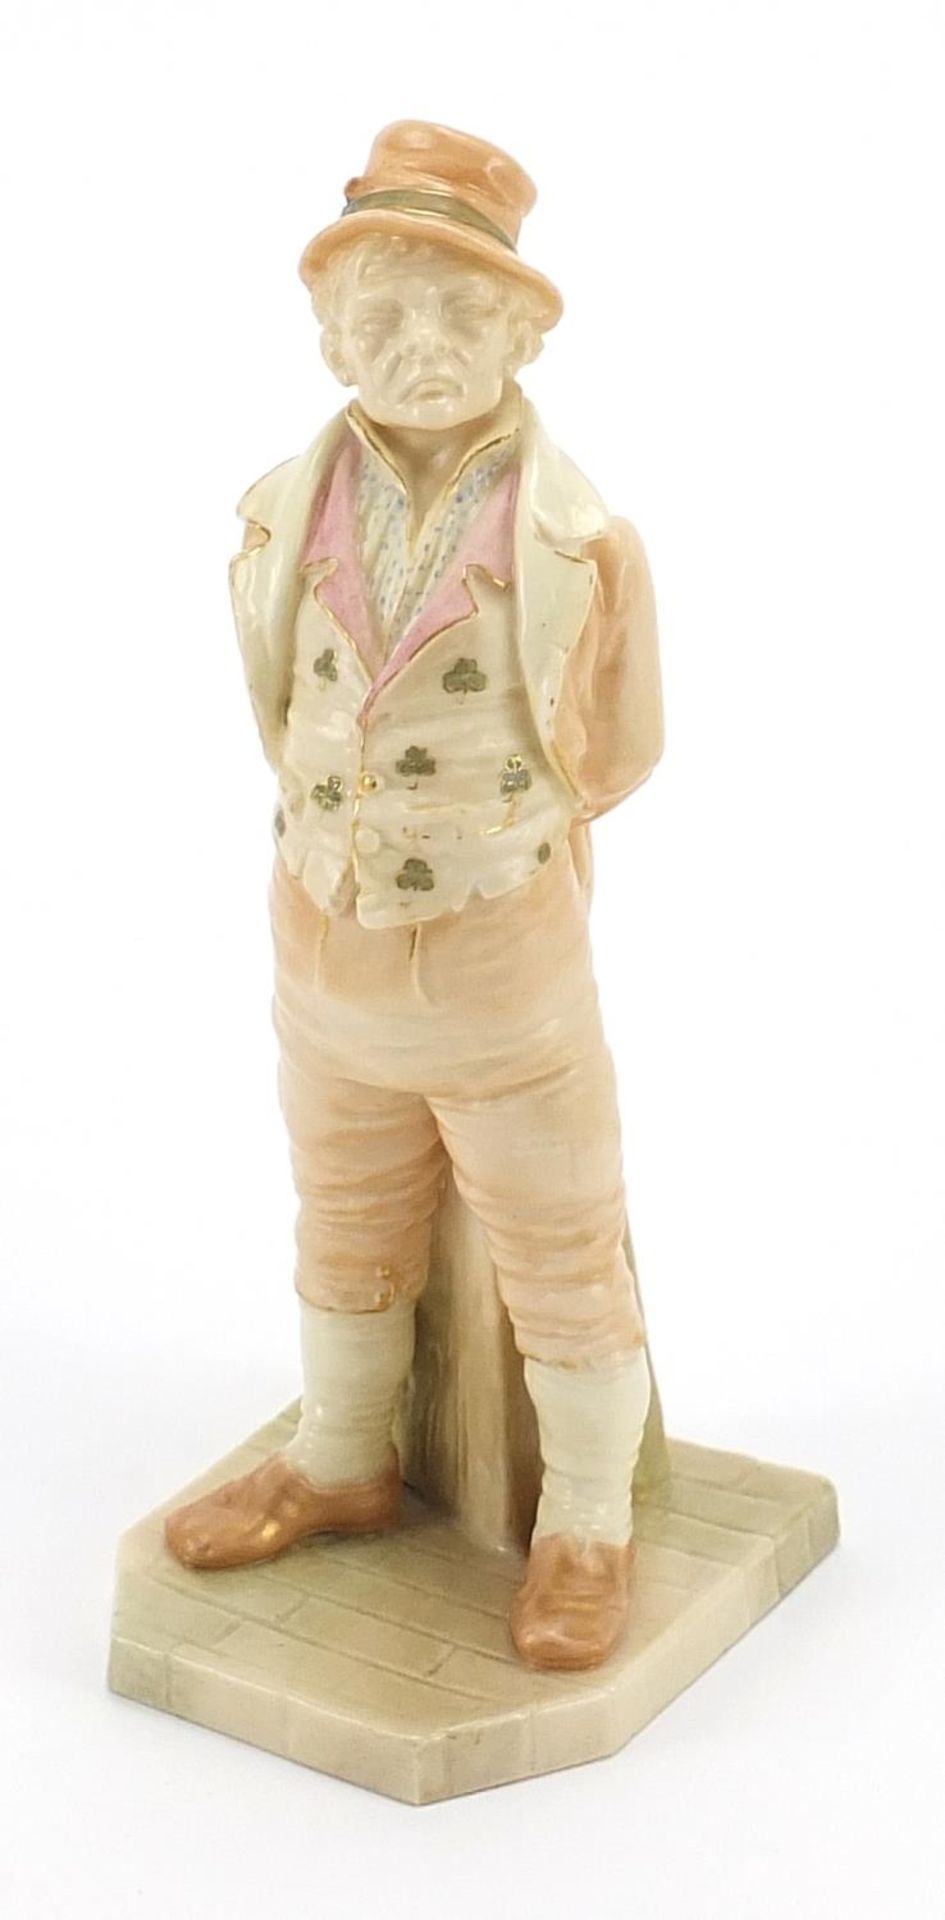 James Hadley for Royal Worcester blush ivory figure of The Irishman, 17.5cm high